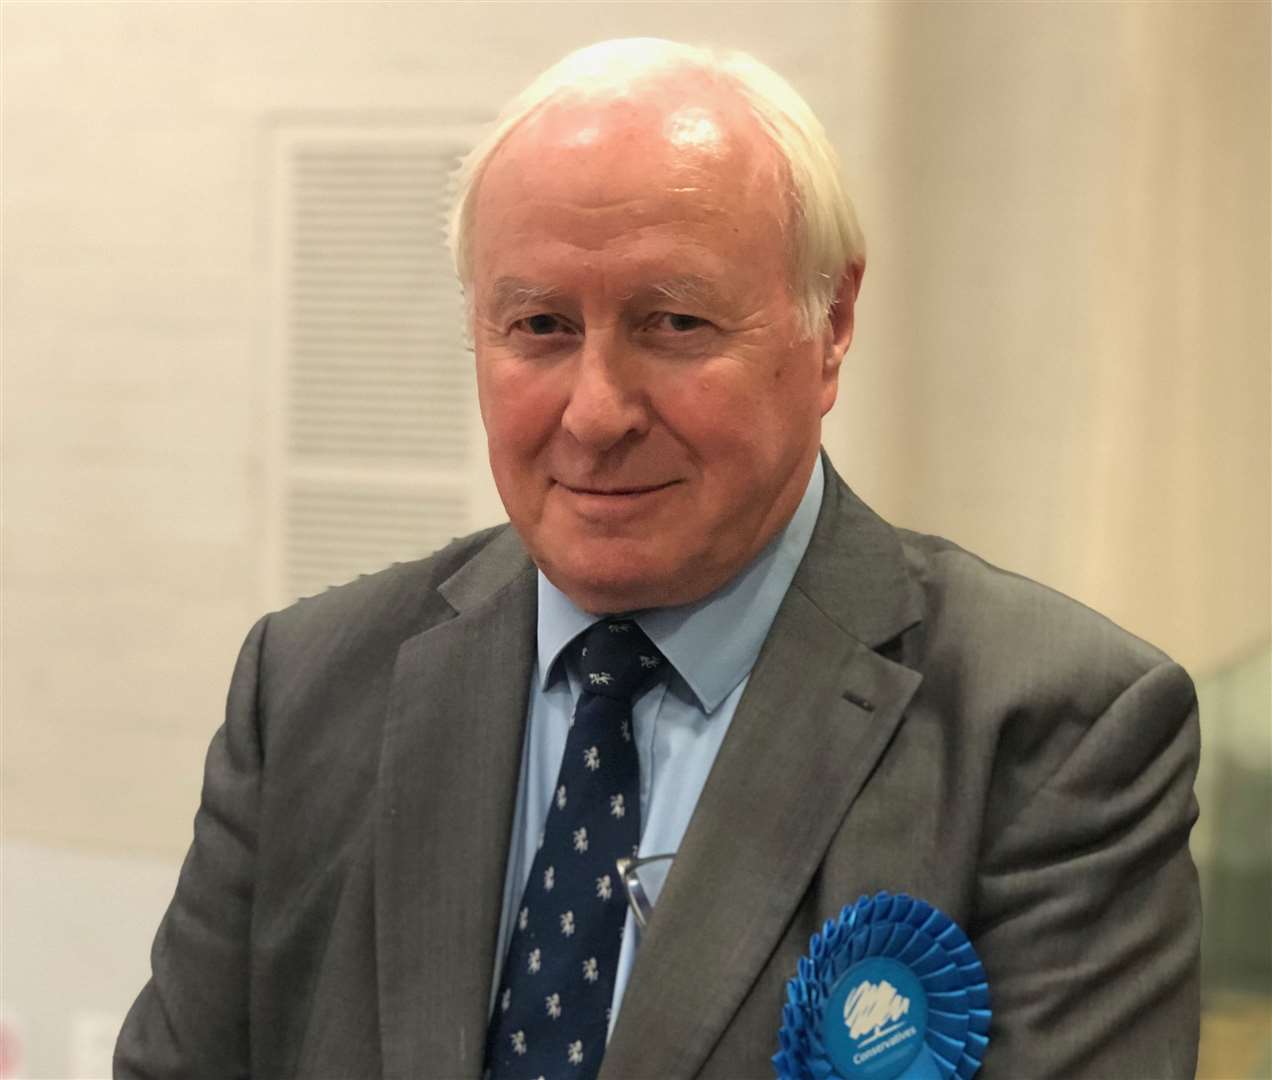 Cllr David Monk is leader of Folkestone and Hythe District Council